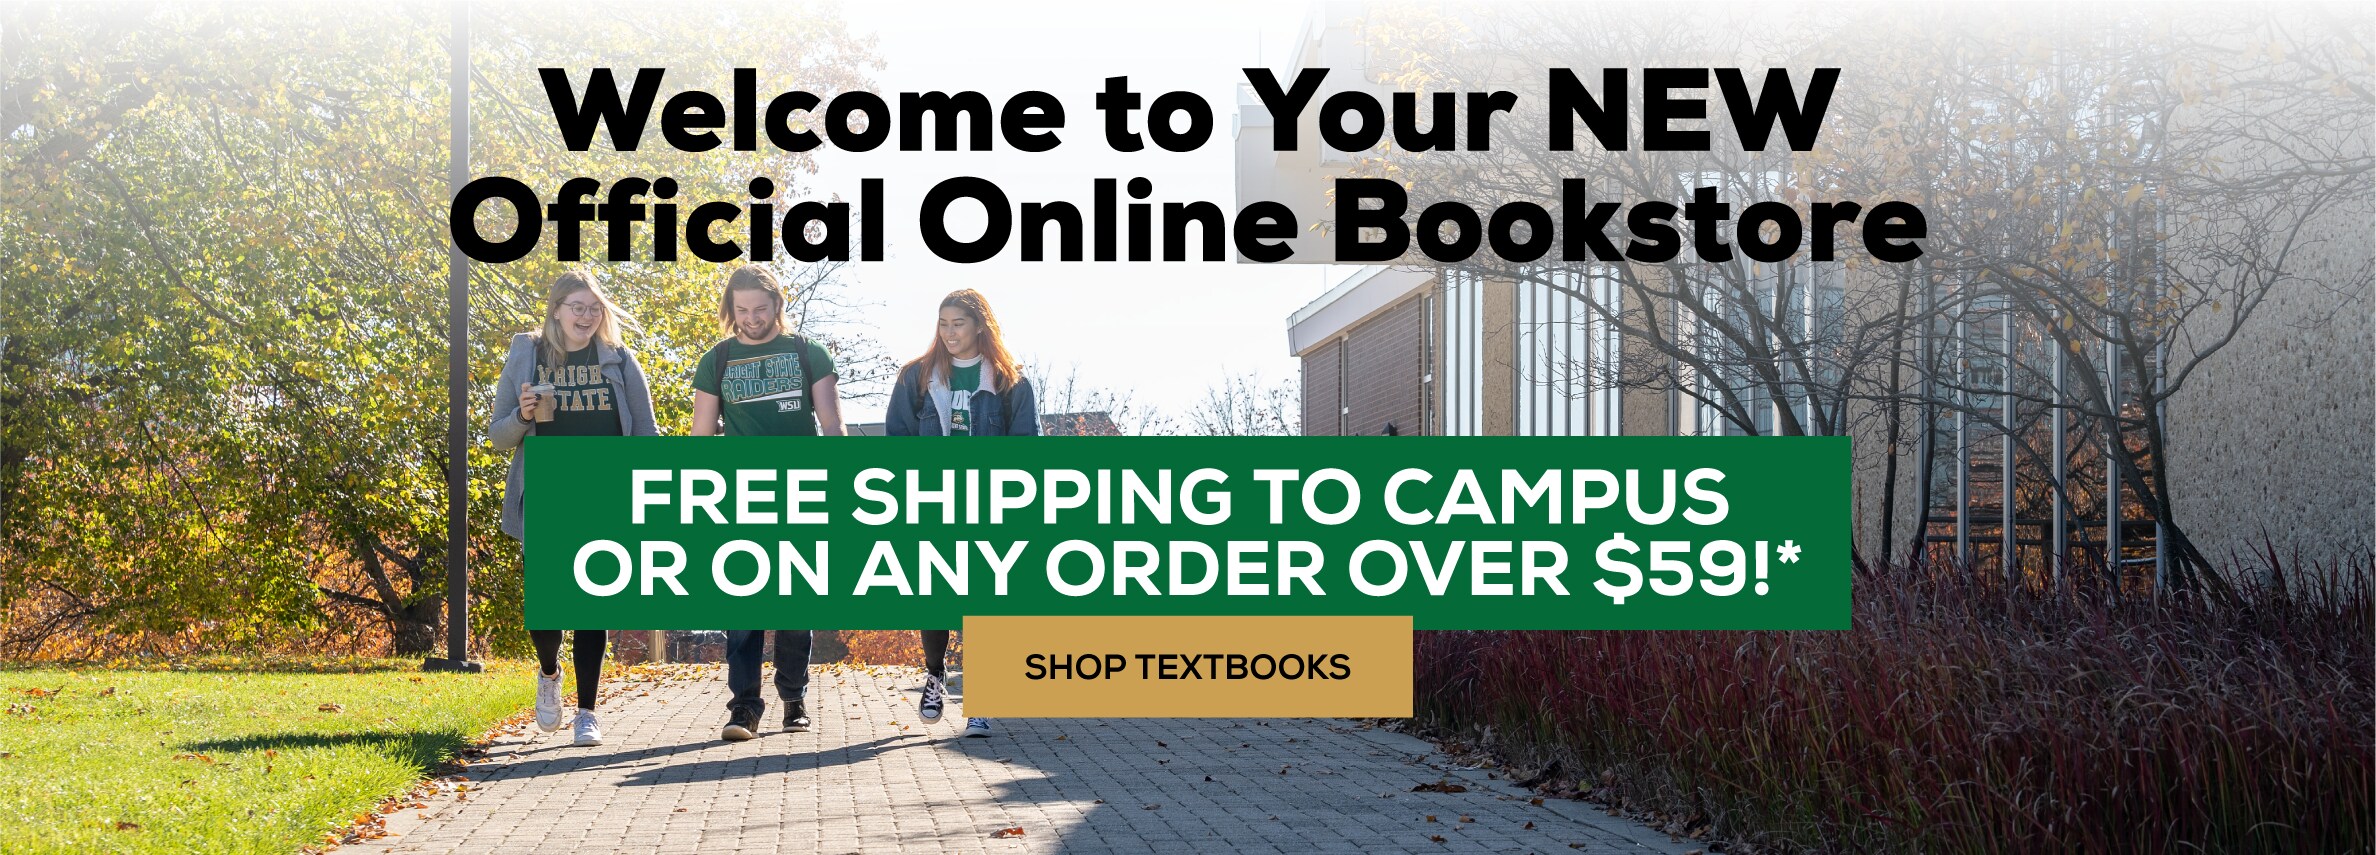 Welcome to your official online bookstore. Free shipping to campus OR on any order over $59! Shop textbooks.